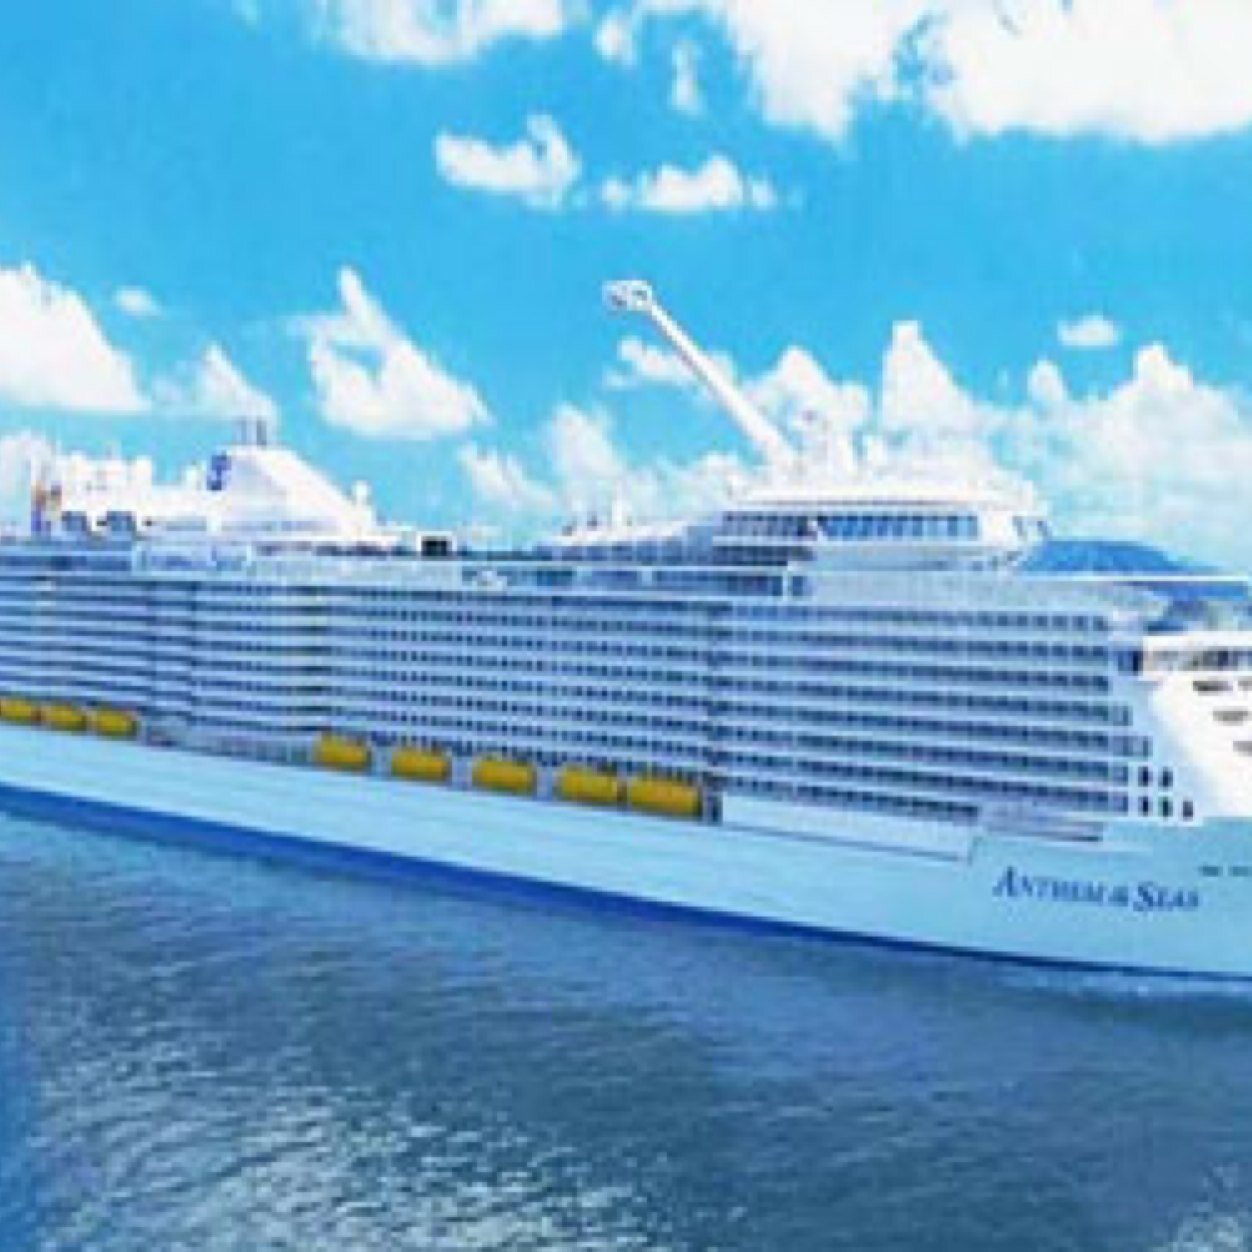 Welcome to the twitter page for the most newest Royal carribean ship 'ANTHEM OF THE SEAS'